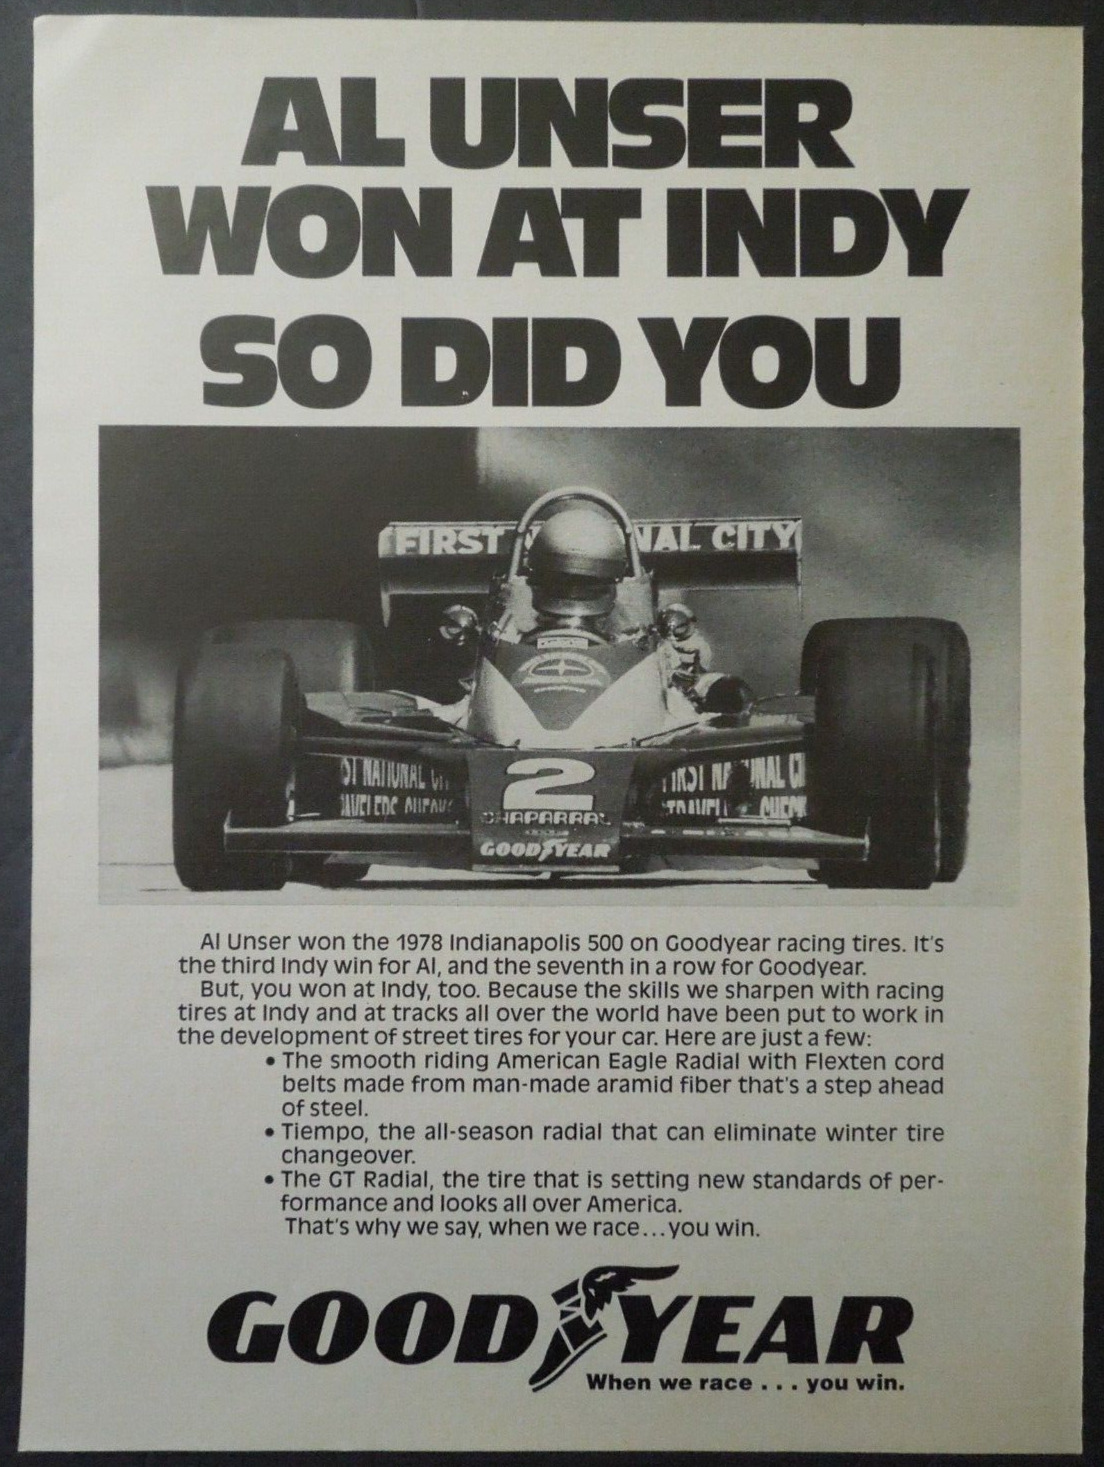 1978 GOODYEAR Tires Magazine Ad - AL UNSER Won At Indy So Did You.